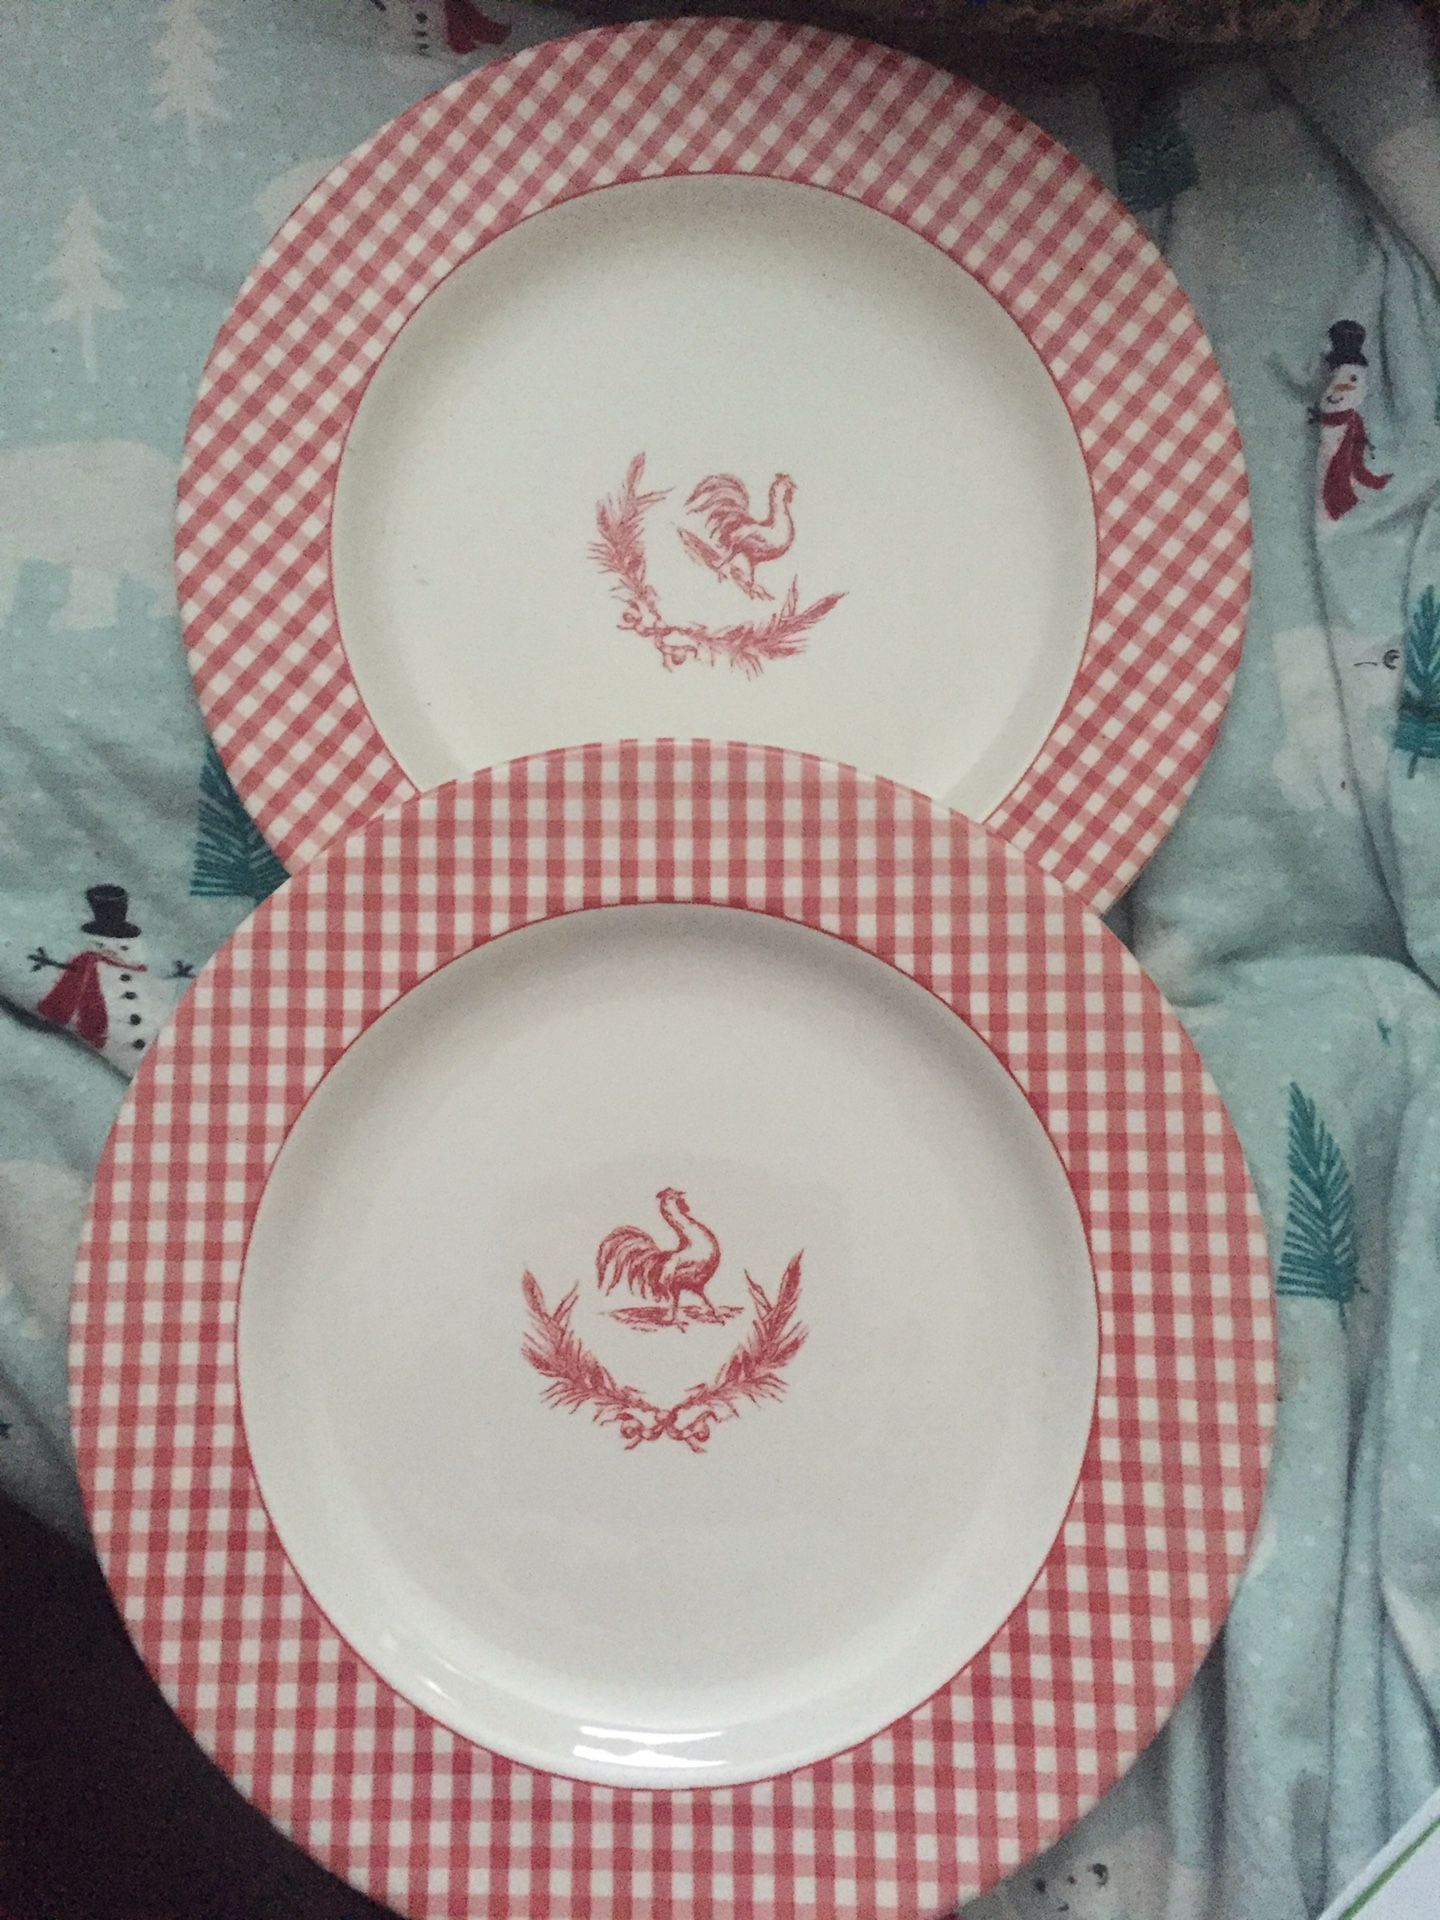 2-Decorative Rooster Plates